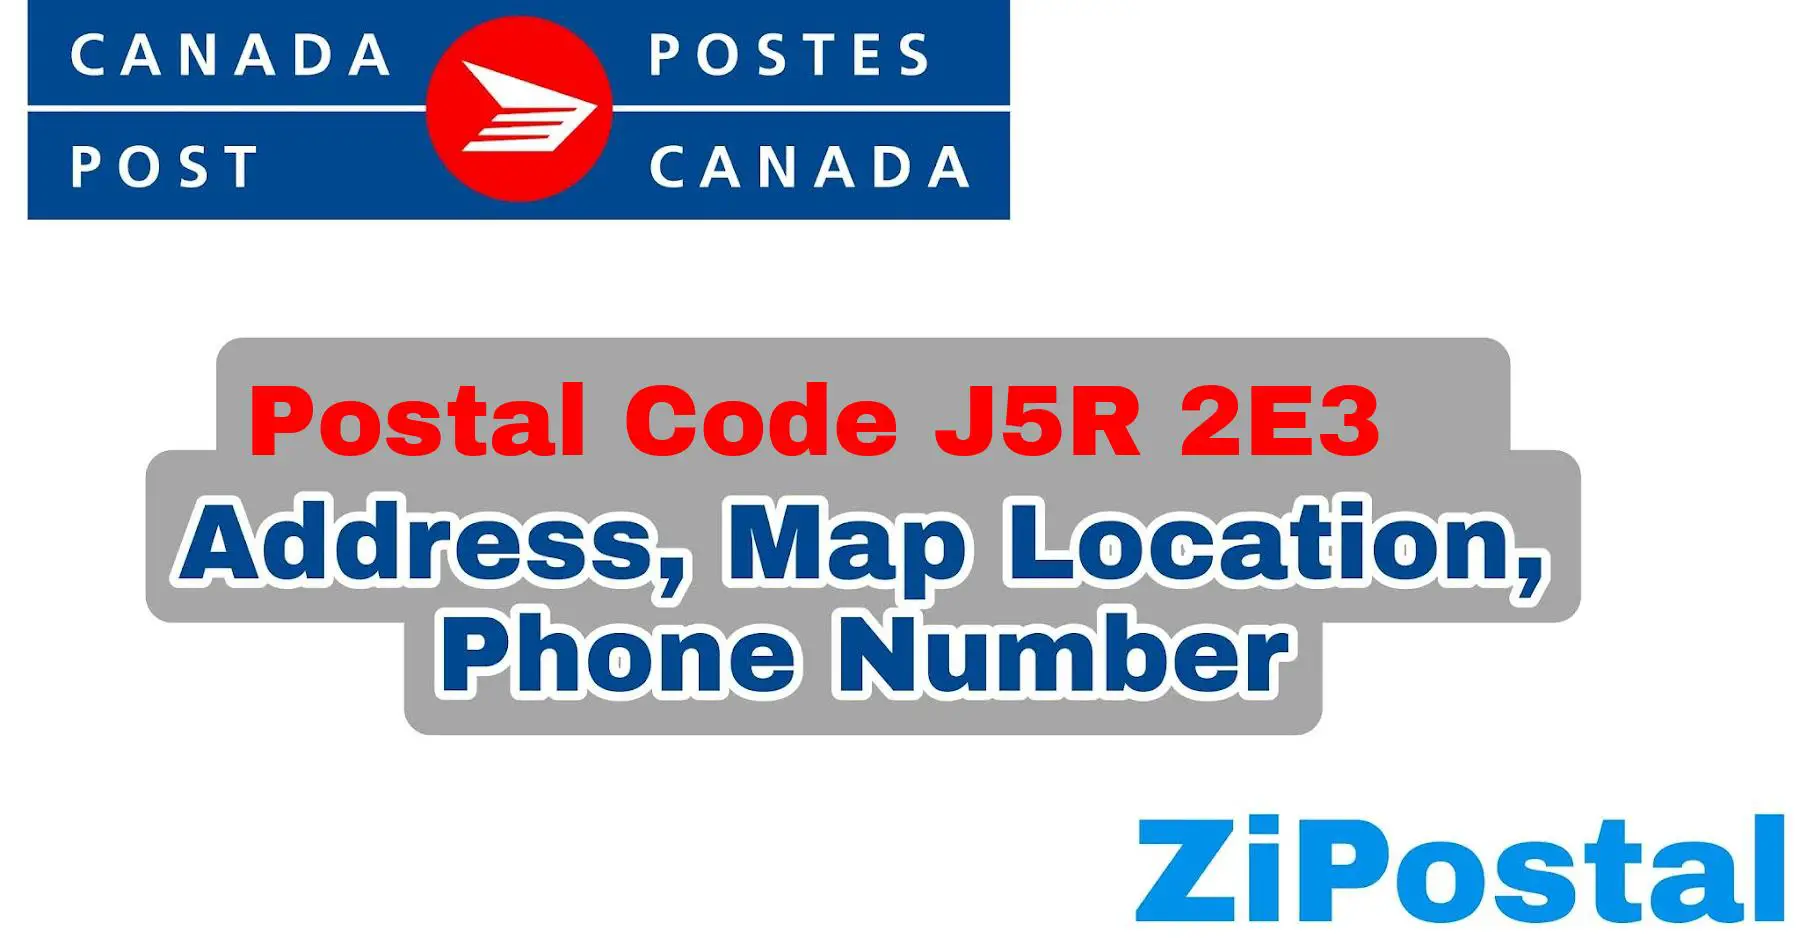 Postal Code J5R 2E3 Address Map Location and Phone Number